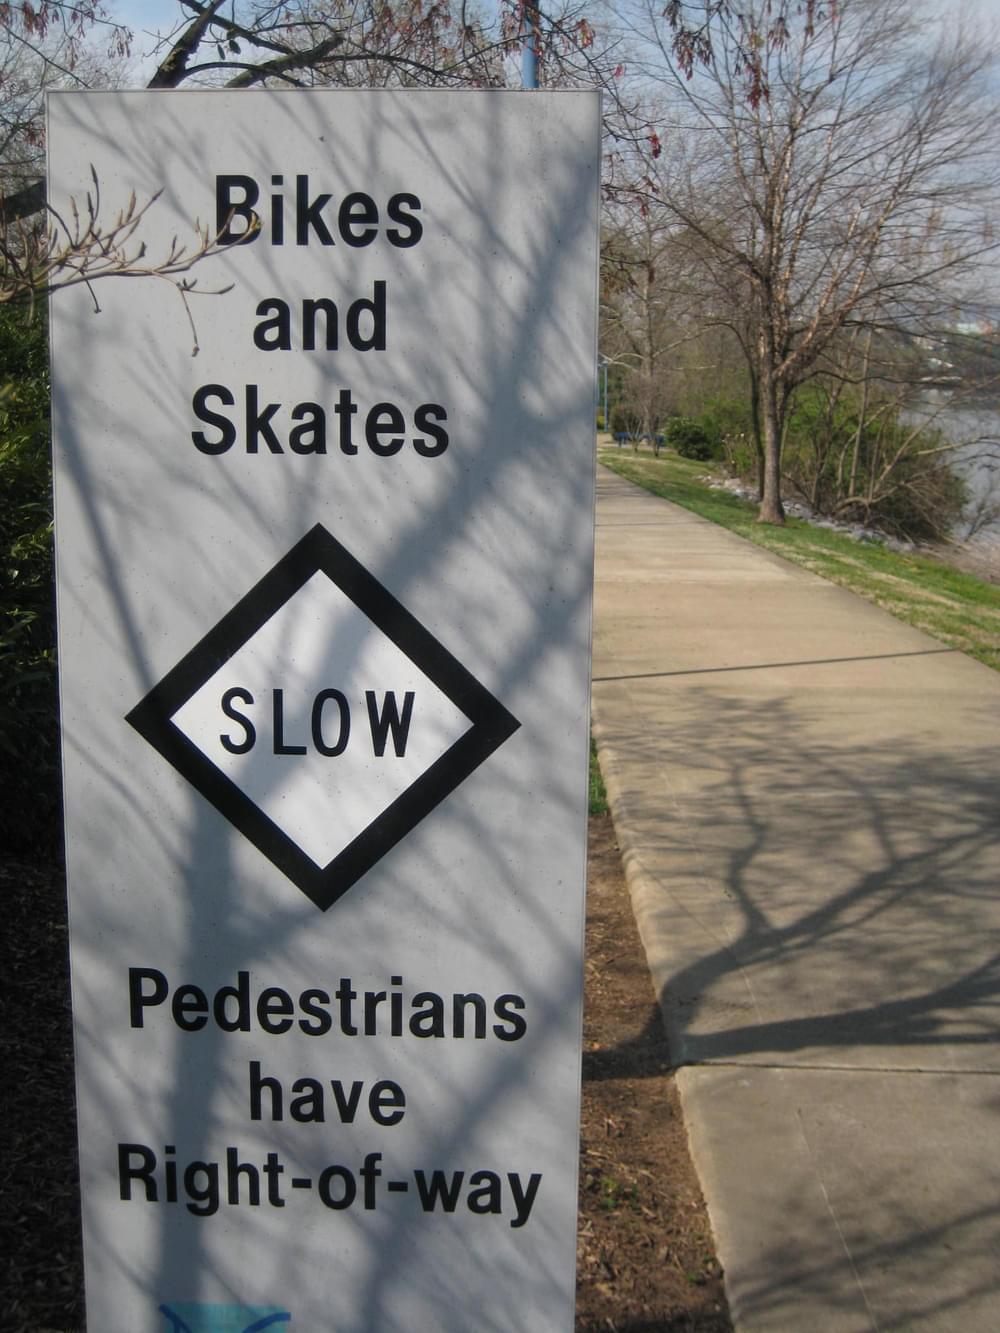 Bikers and skaters yield to walkers. Post on the Tennessee Riverwalk Trail in Chattanooga, Tennessee